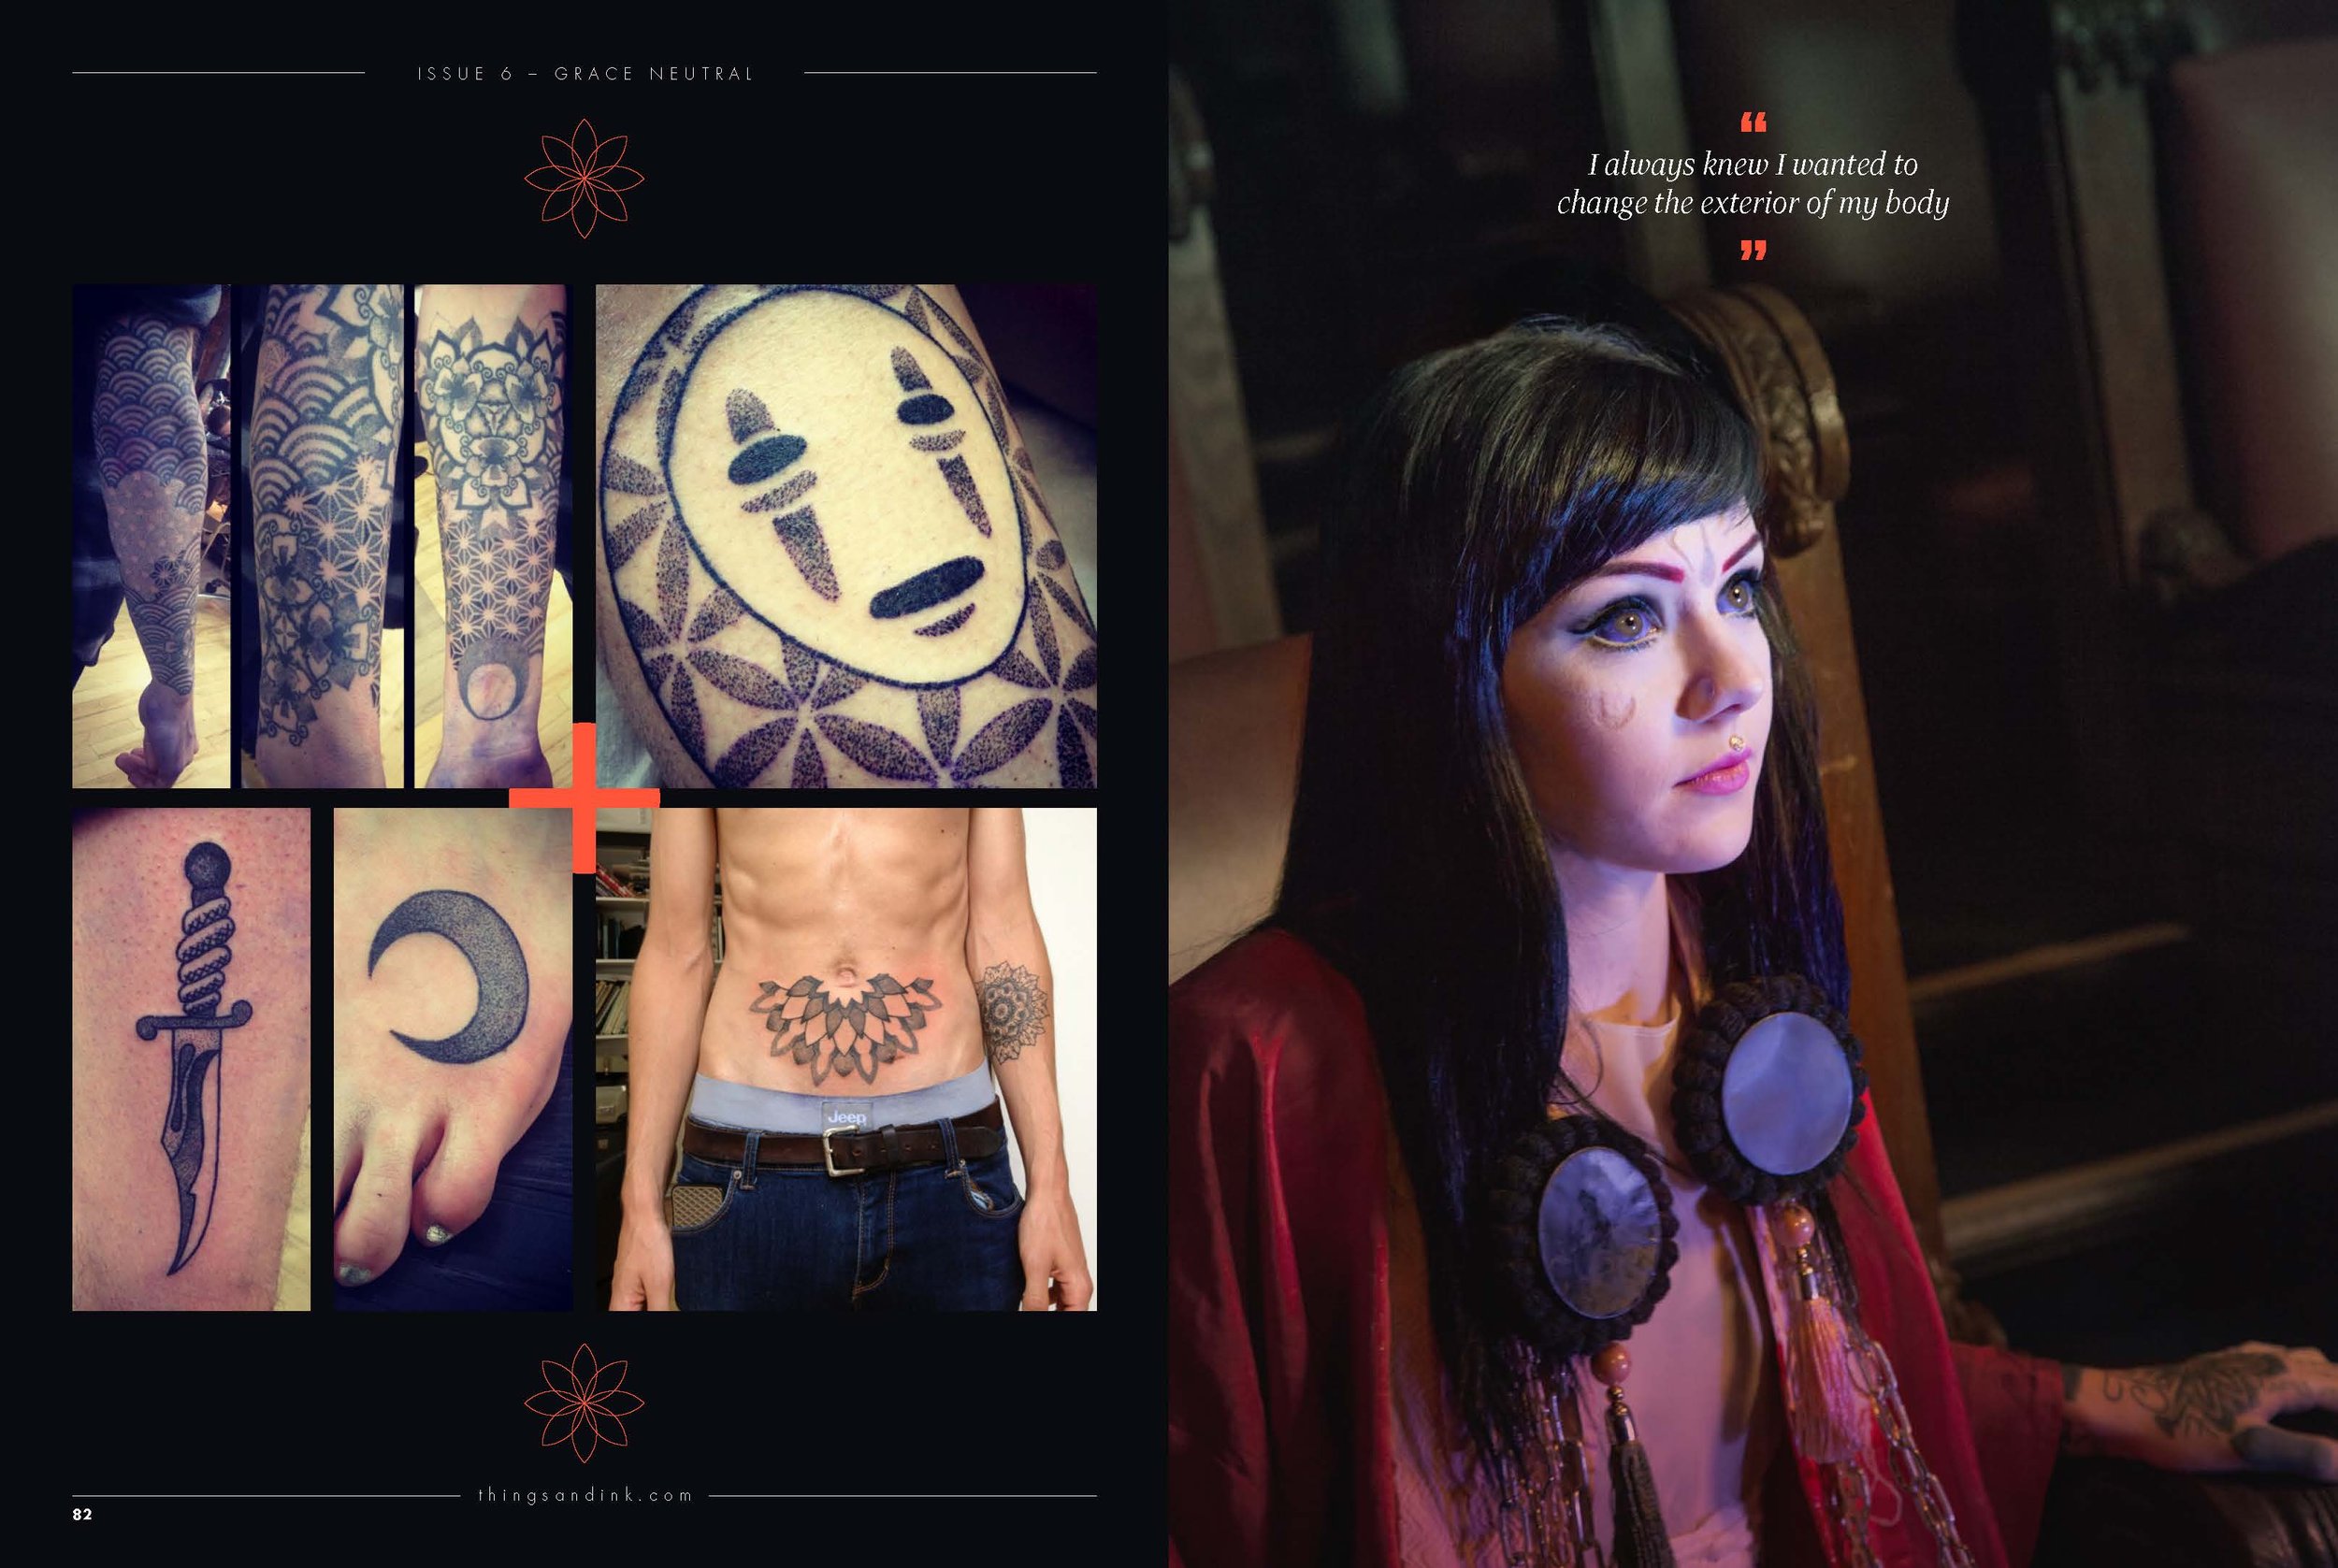 80-87 Grace Neutral cover_Page_2.jpg